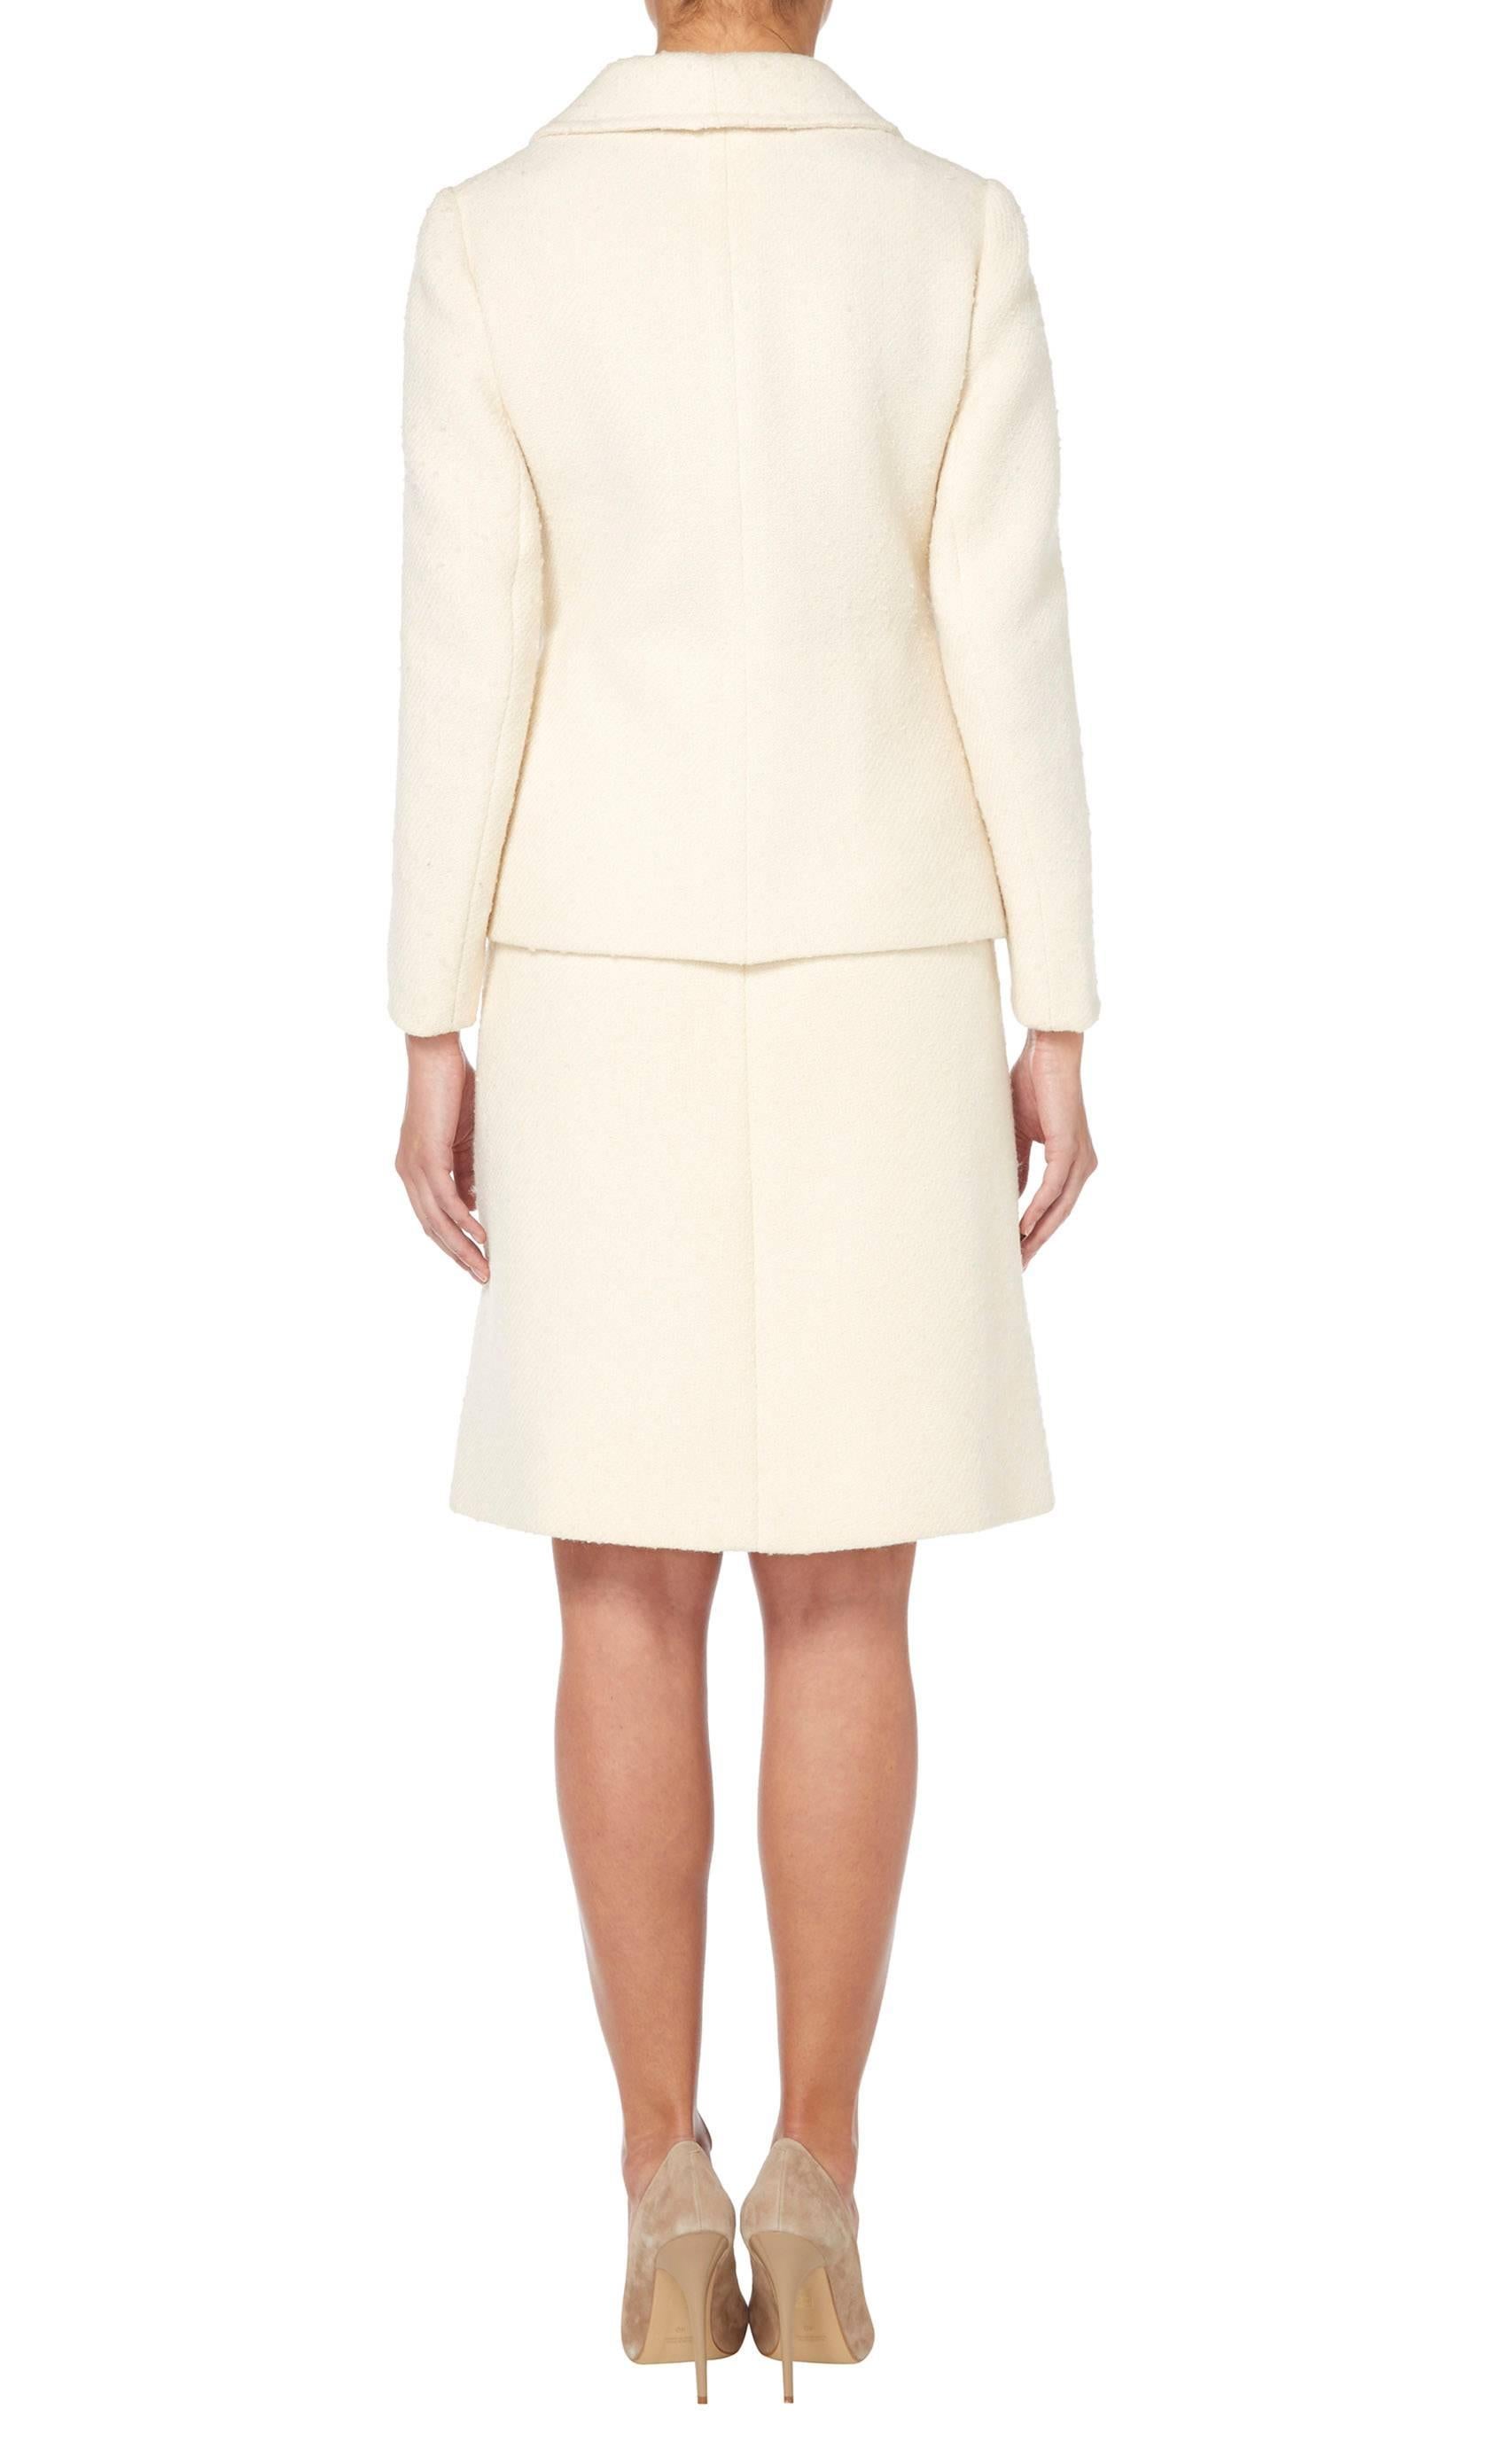 White Ted Lapidus ivory skirt suit, circa 1965 For Sale